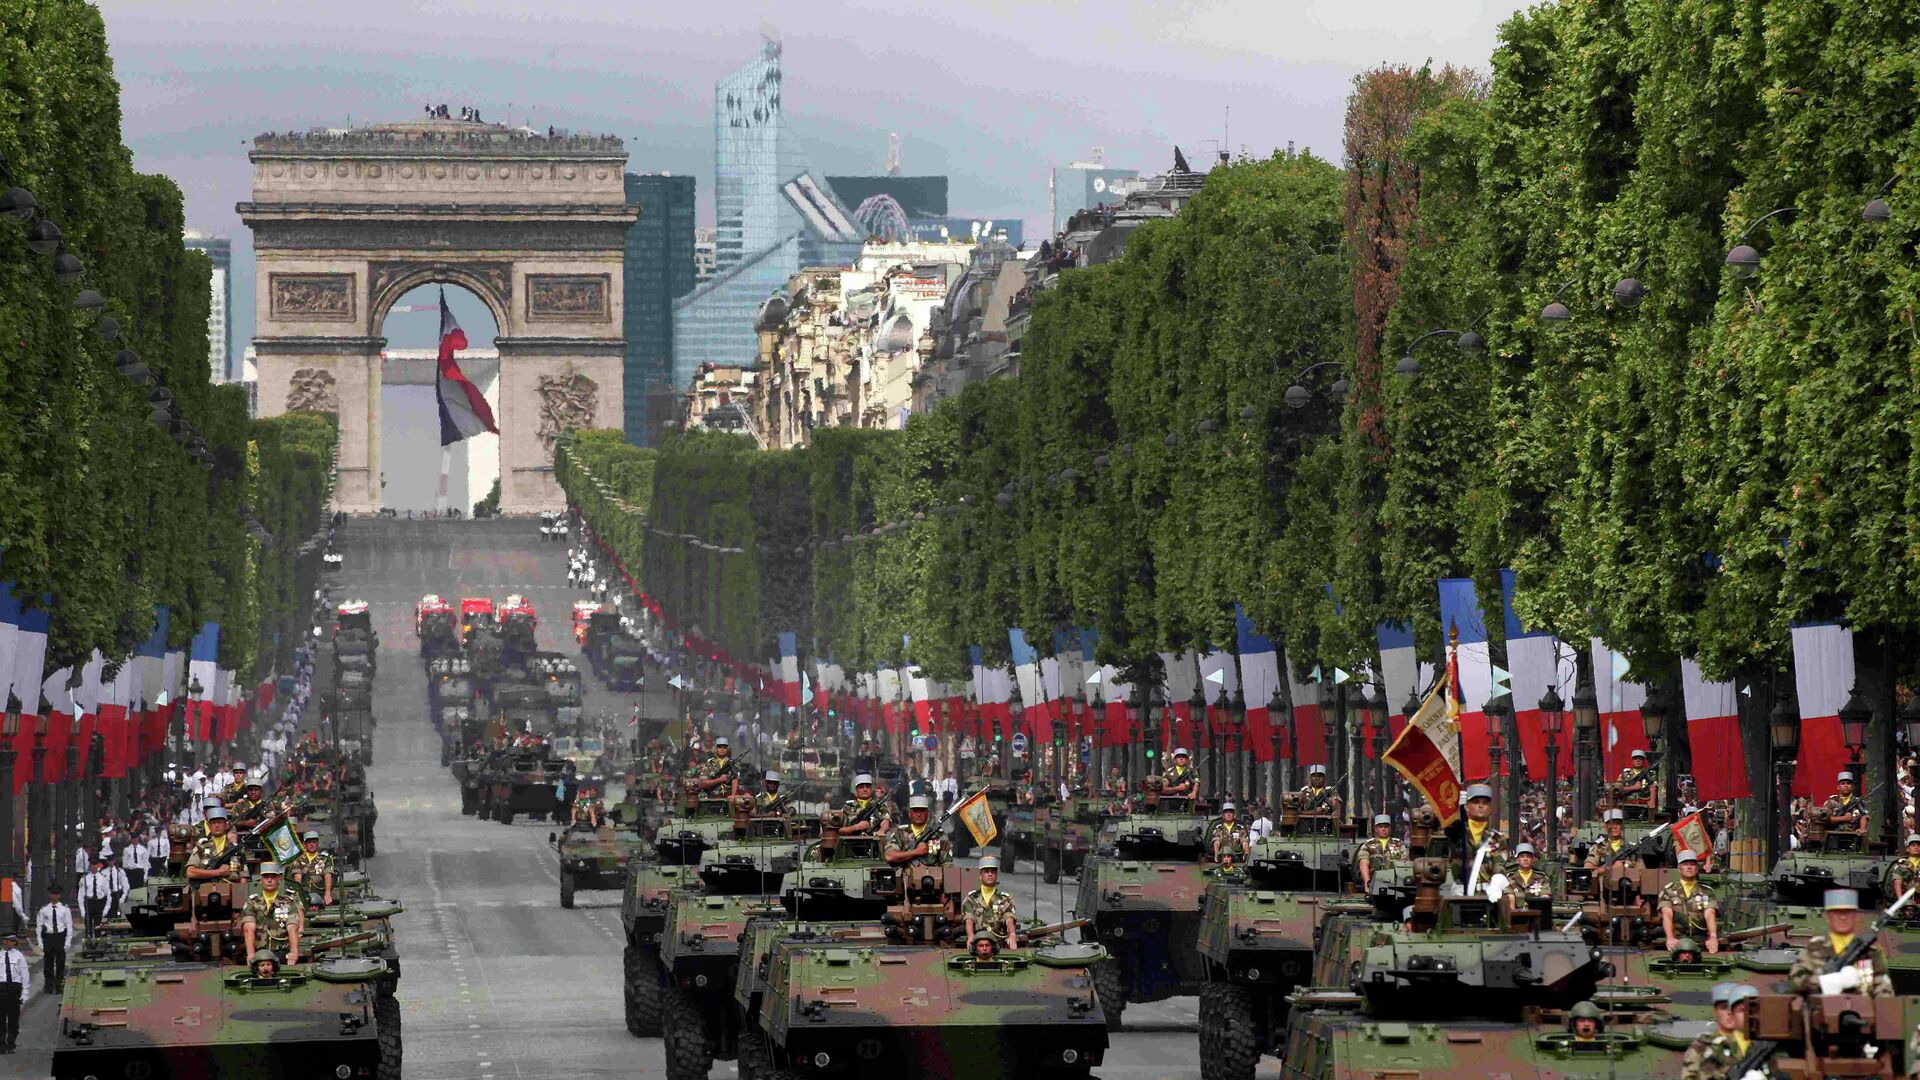 Tanks rumble down the Champs Elysee avenue during the traditional Bastille Day military parade in Paris, France, July 14, 2015 - Sputnik Moldova-România, 1920, 07.02.2022